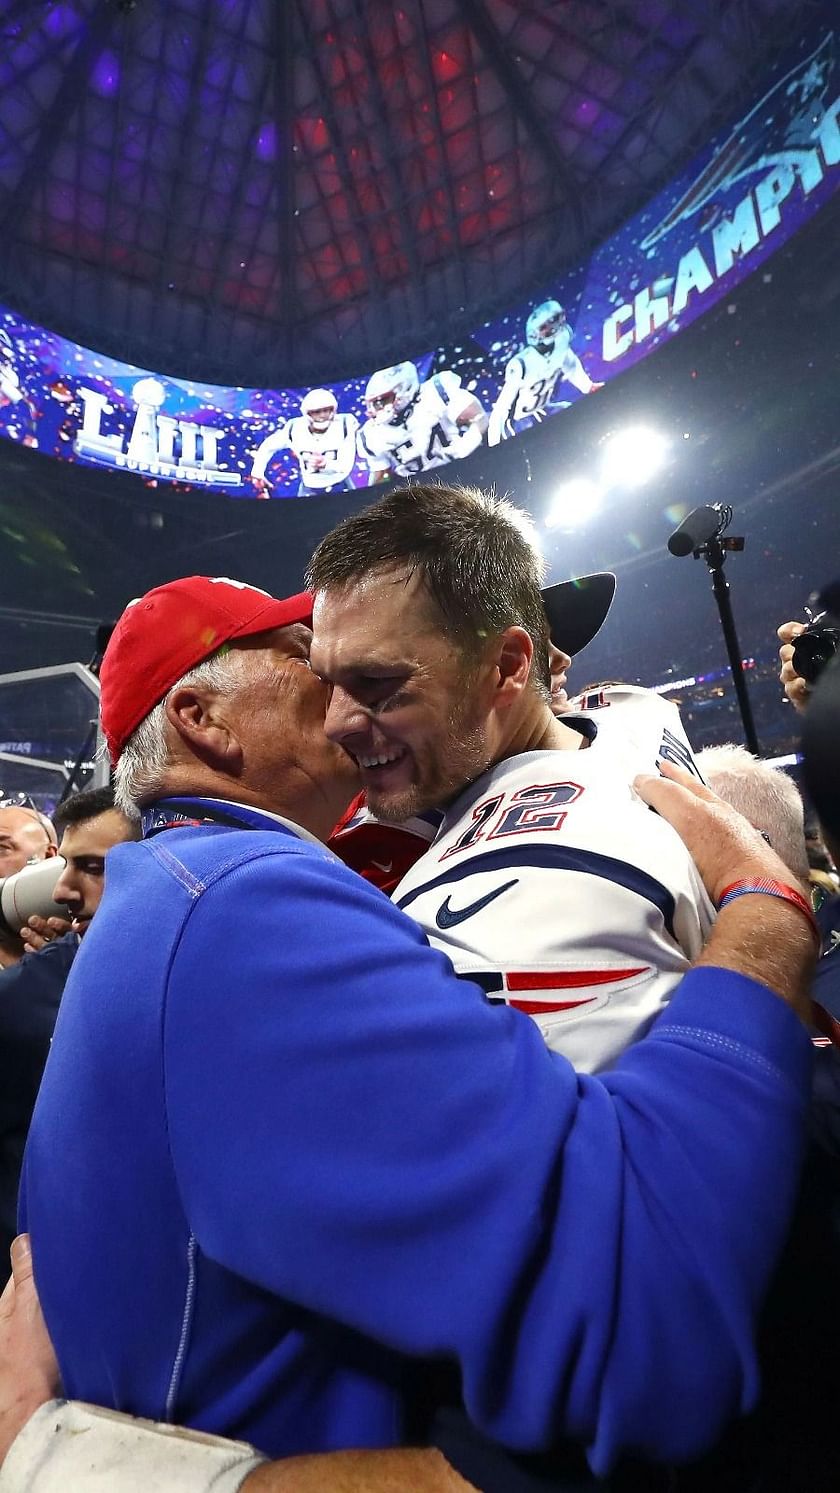 Tom Brady Sr. has his say about the Patriots and Bill Belichick